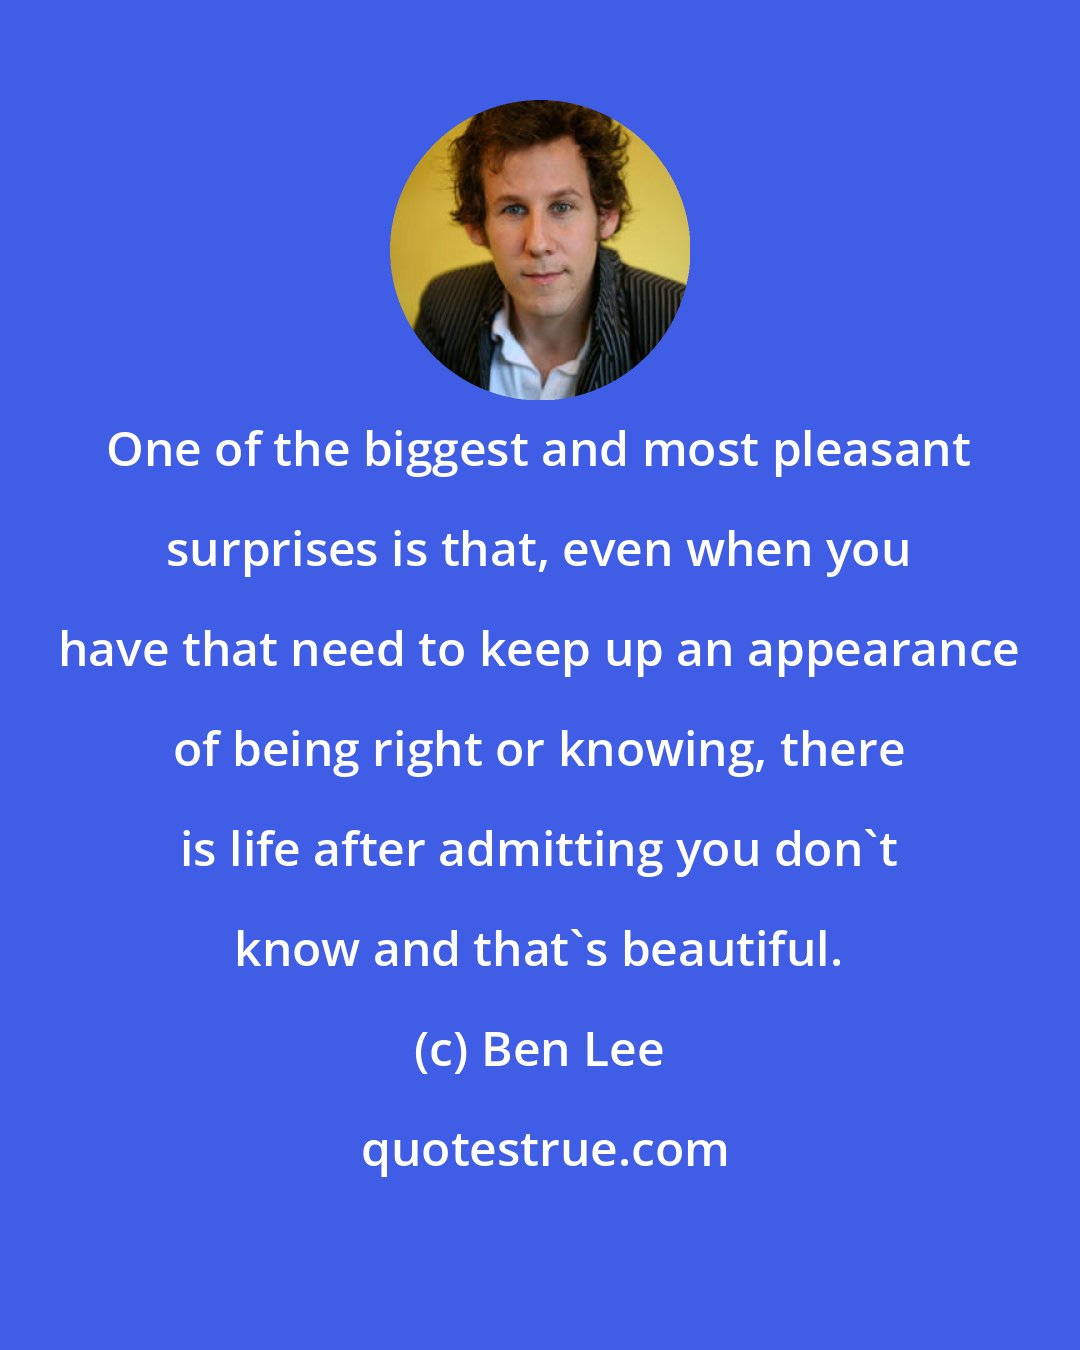 Ben Lee: One of the biggest and most pleasant surprises is that, even when you have that need to keep up an appearance of being right or knowing, there is life after admitting you don't know and that's beautiful.